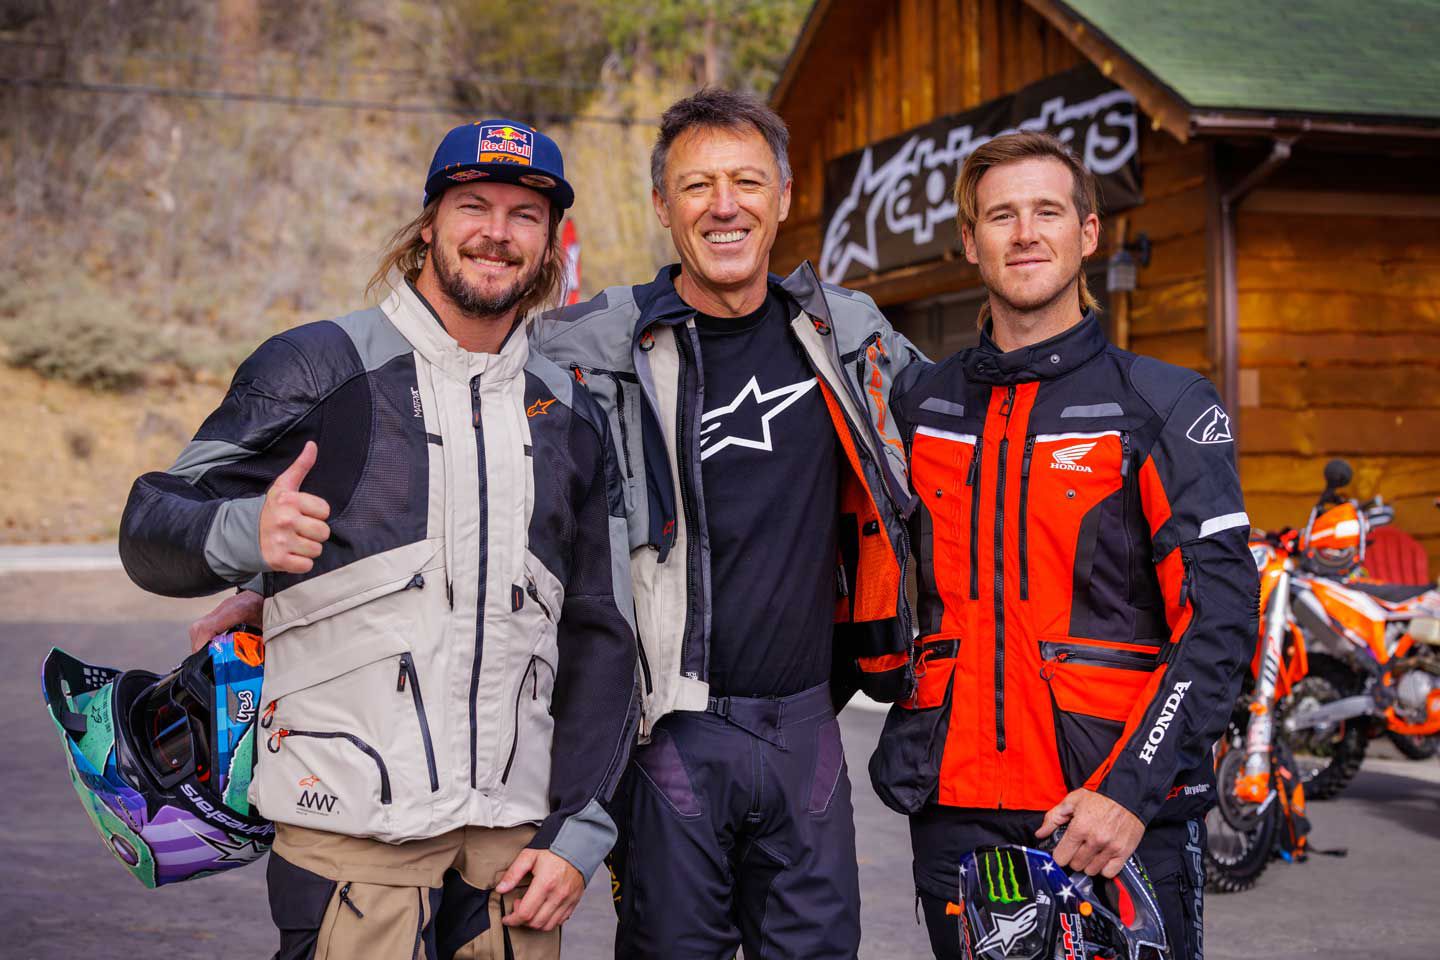 Alpinestars president Gabriele Mazzarolo lives, eats, and breathes motorcycles. Here he takes a photo with two of his top Dakar-winning athletes, Toby Price (left) and Ricky Brabec (right).